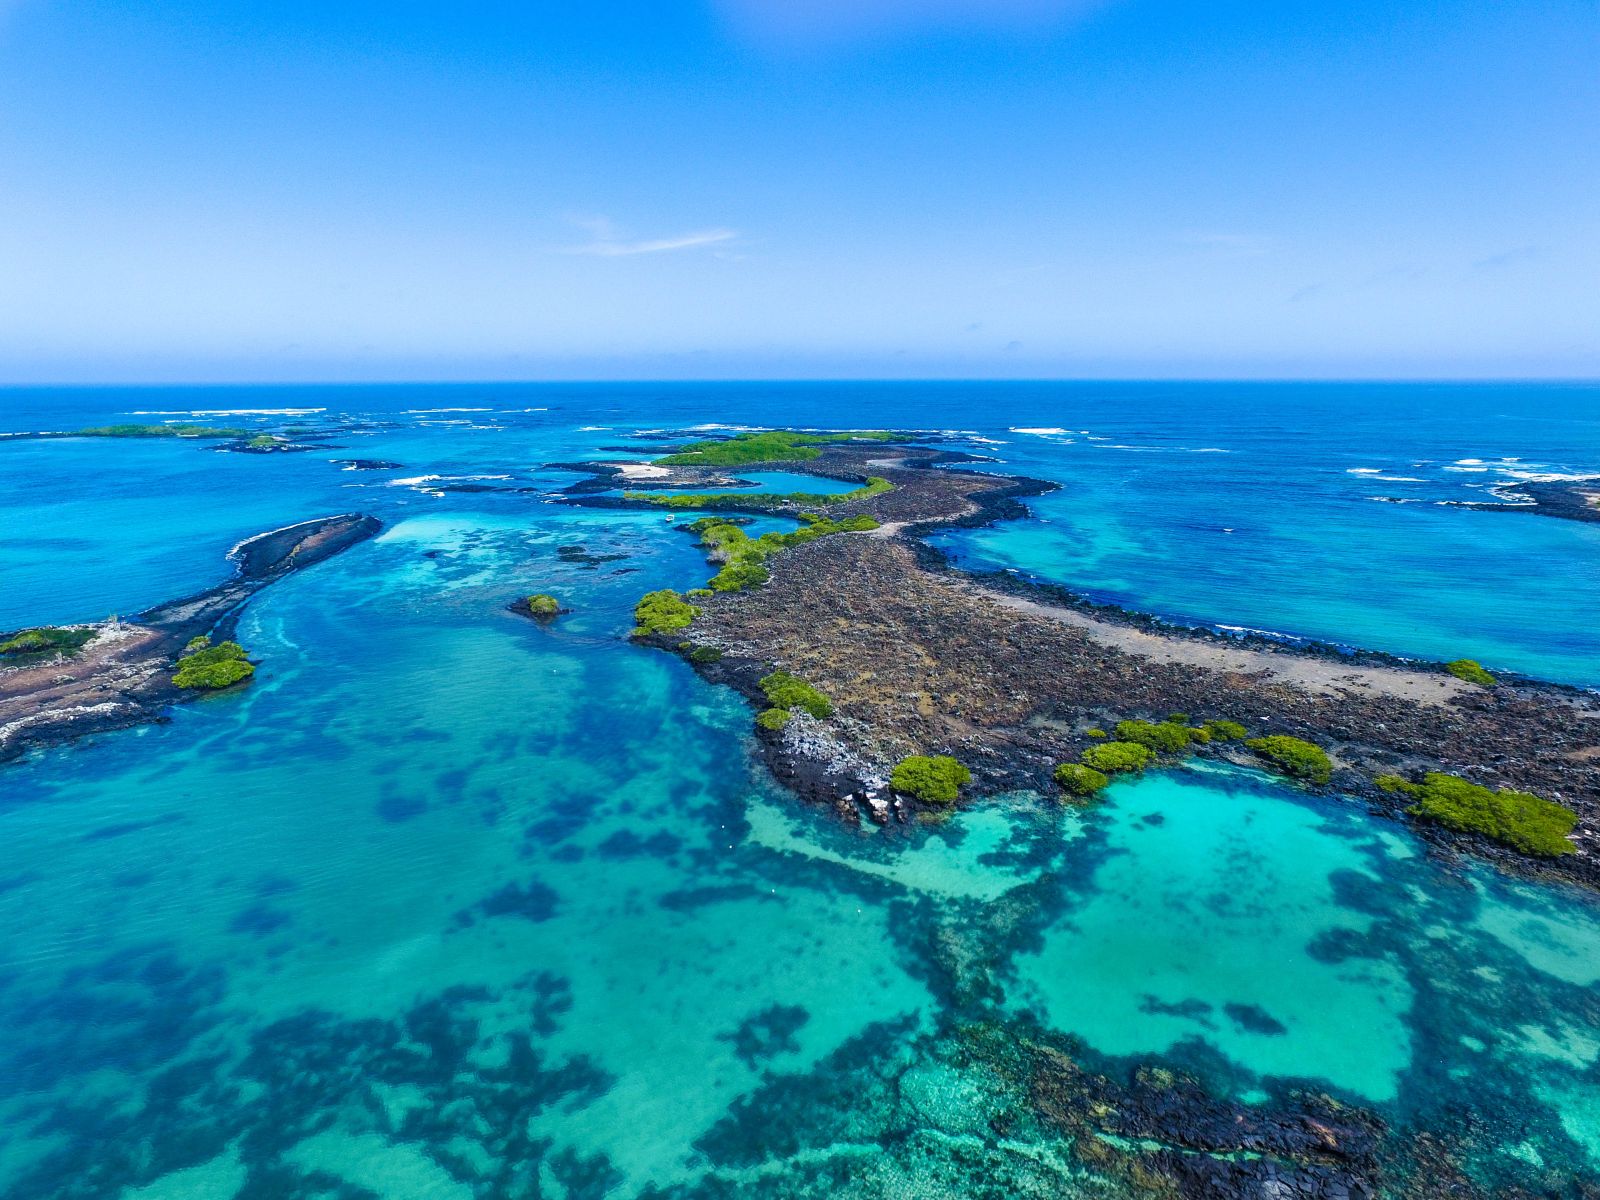 Aerial view of the crystal waters and volcanic islands of the Galapagos archipelago